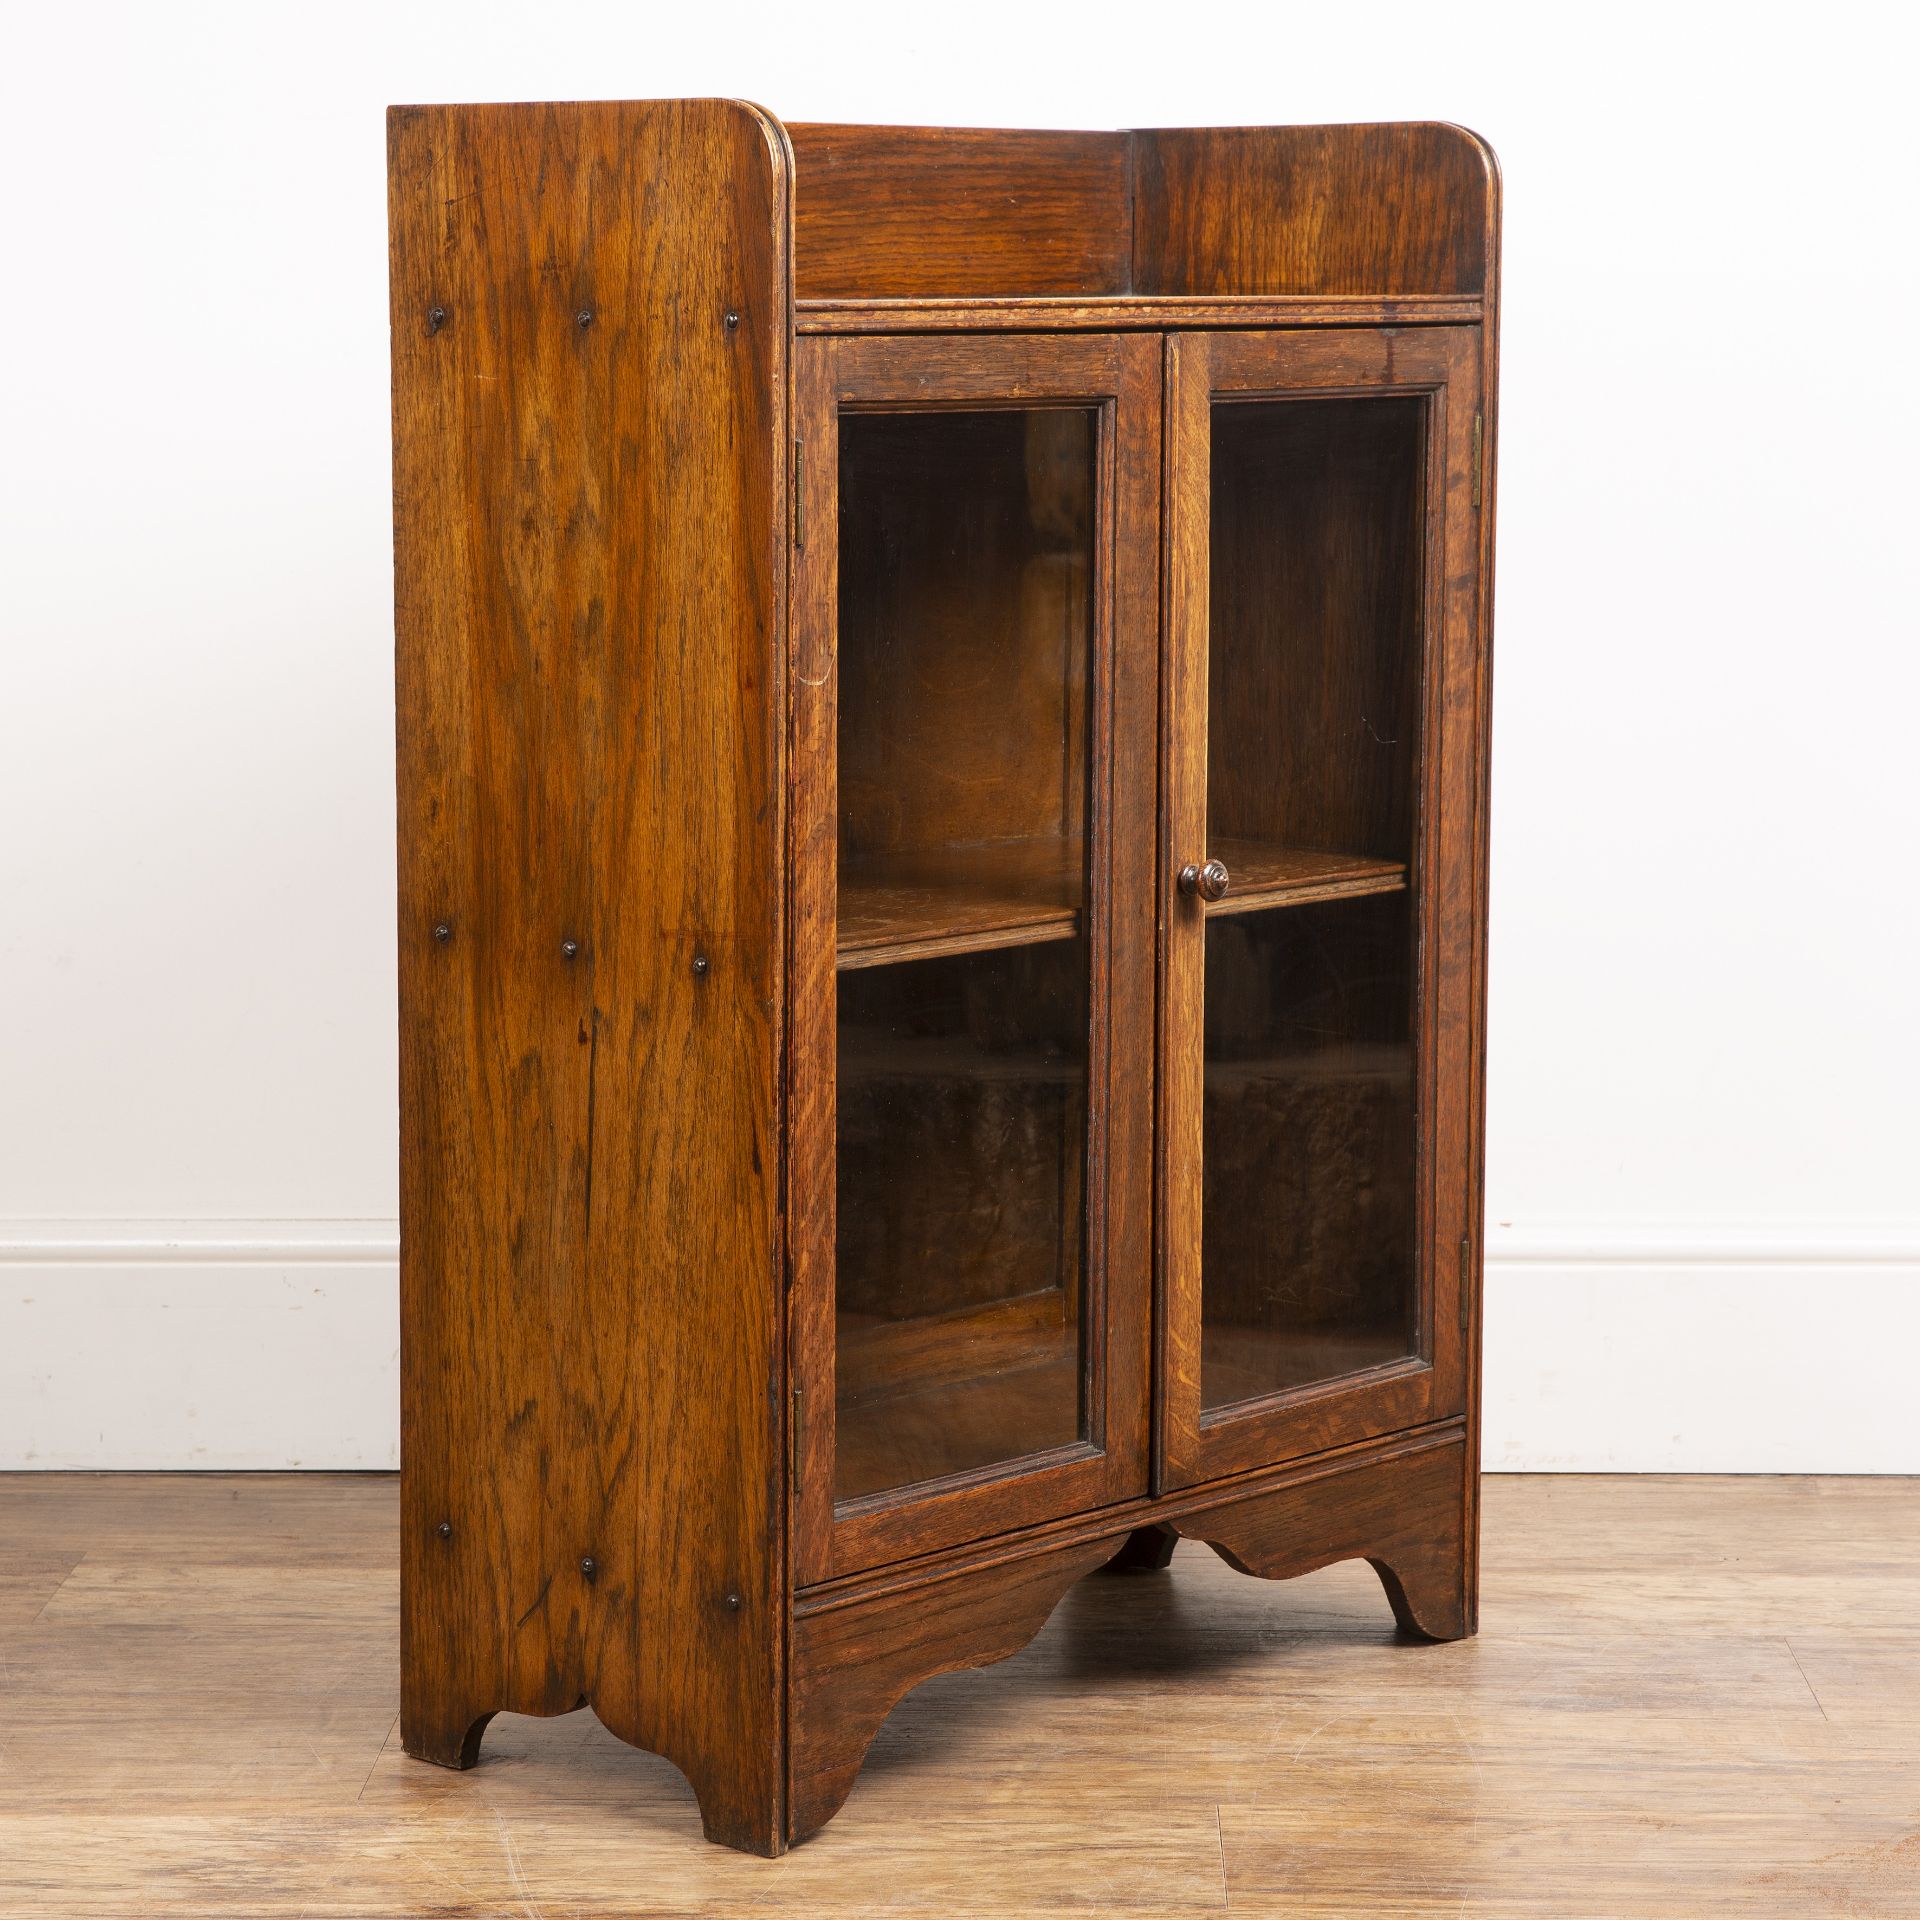 Attributed to Heals oak cupboard, with galleried top, two glazed panel doors with a turned wooden - Image 3 of 5